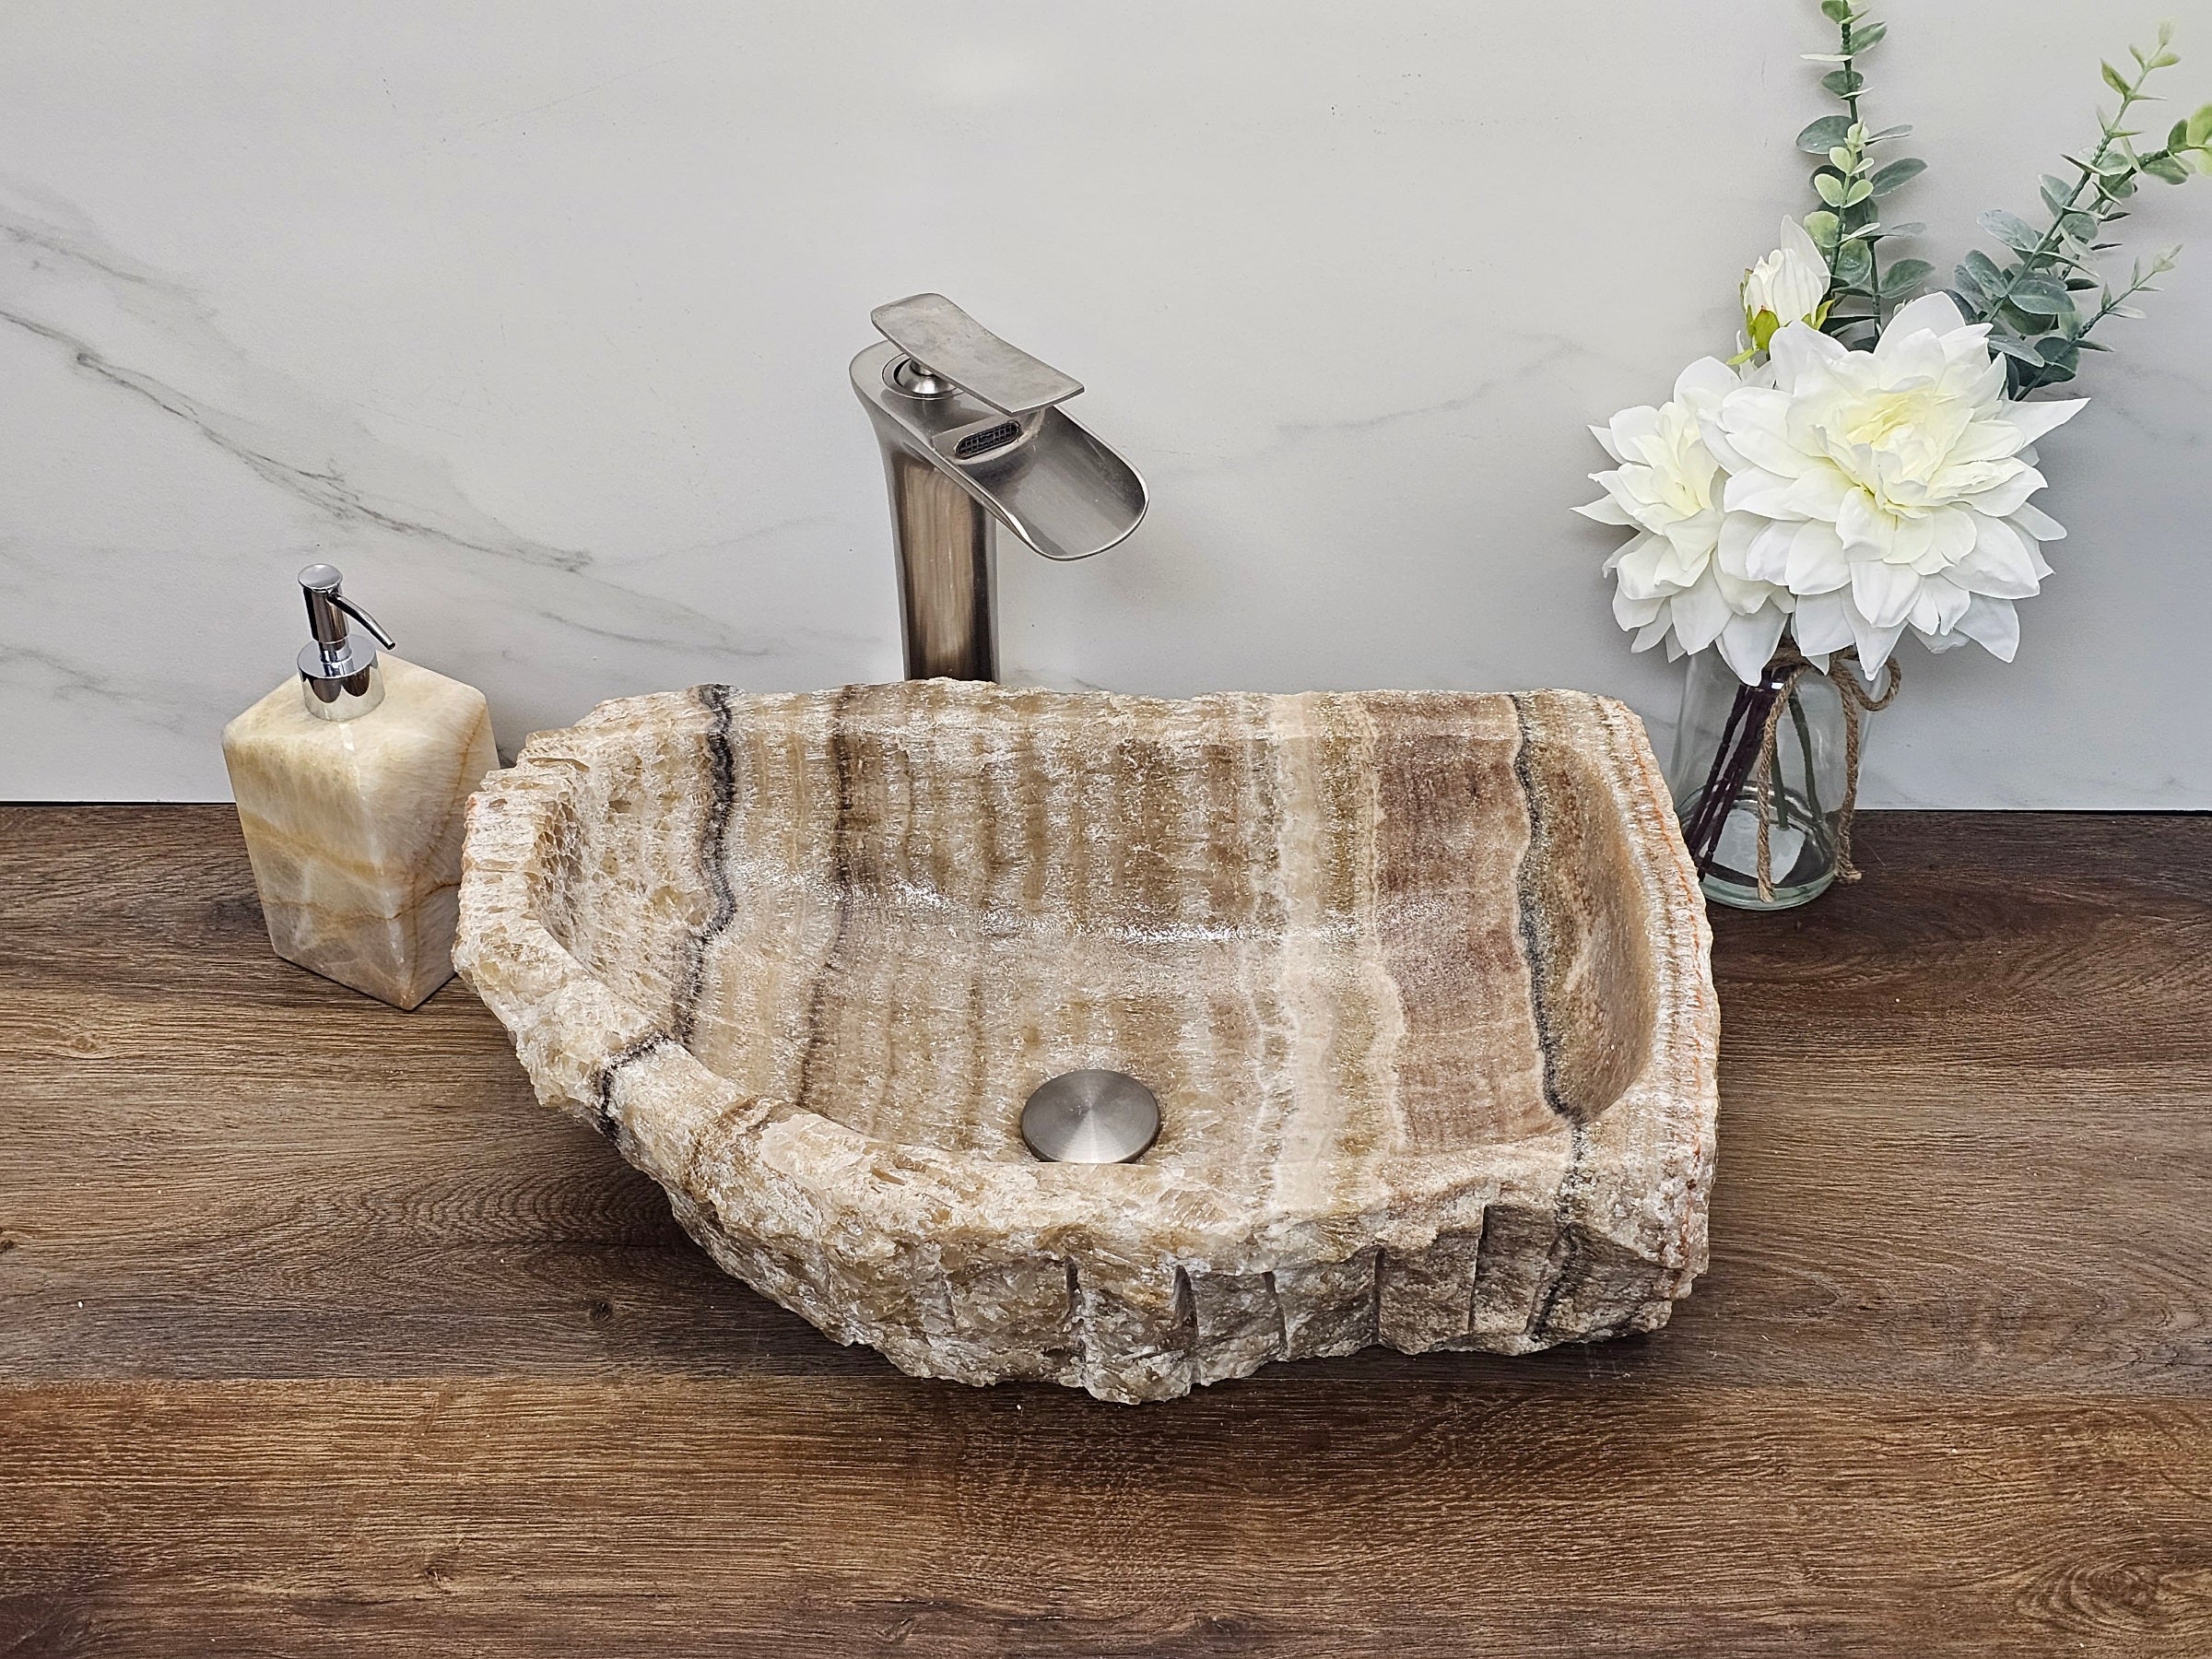 Multi Striped Brown Onyx Vessel Sink. Handmade in Mexico. We hand finish, package, and ship from the USA. Buy now at www.felipeandgrace.com.